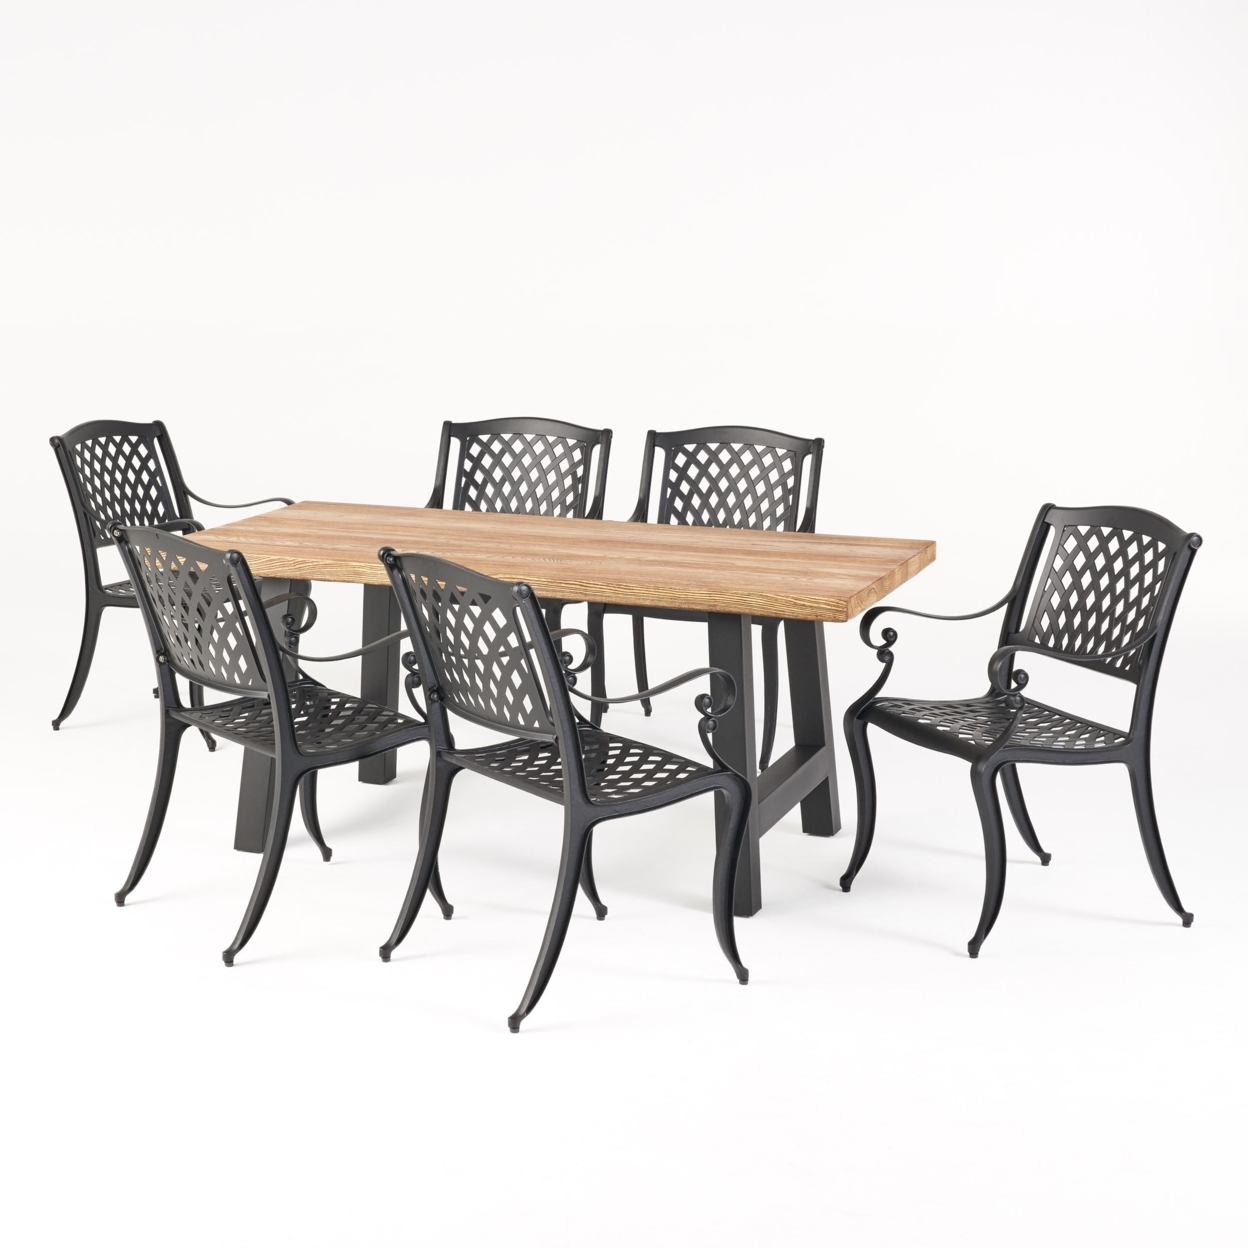 Dory Outdoor 7 Piece Black Sand Aluminum Dining Set With Light Weight Concrete Table